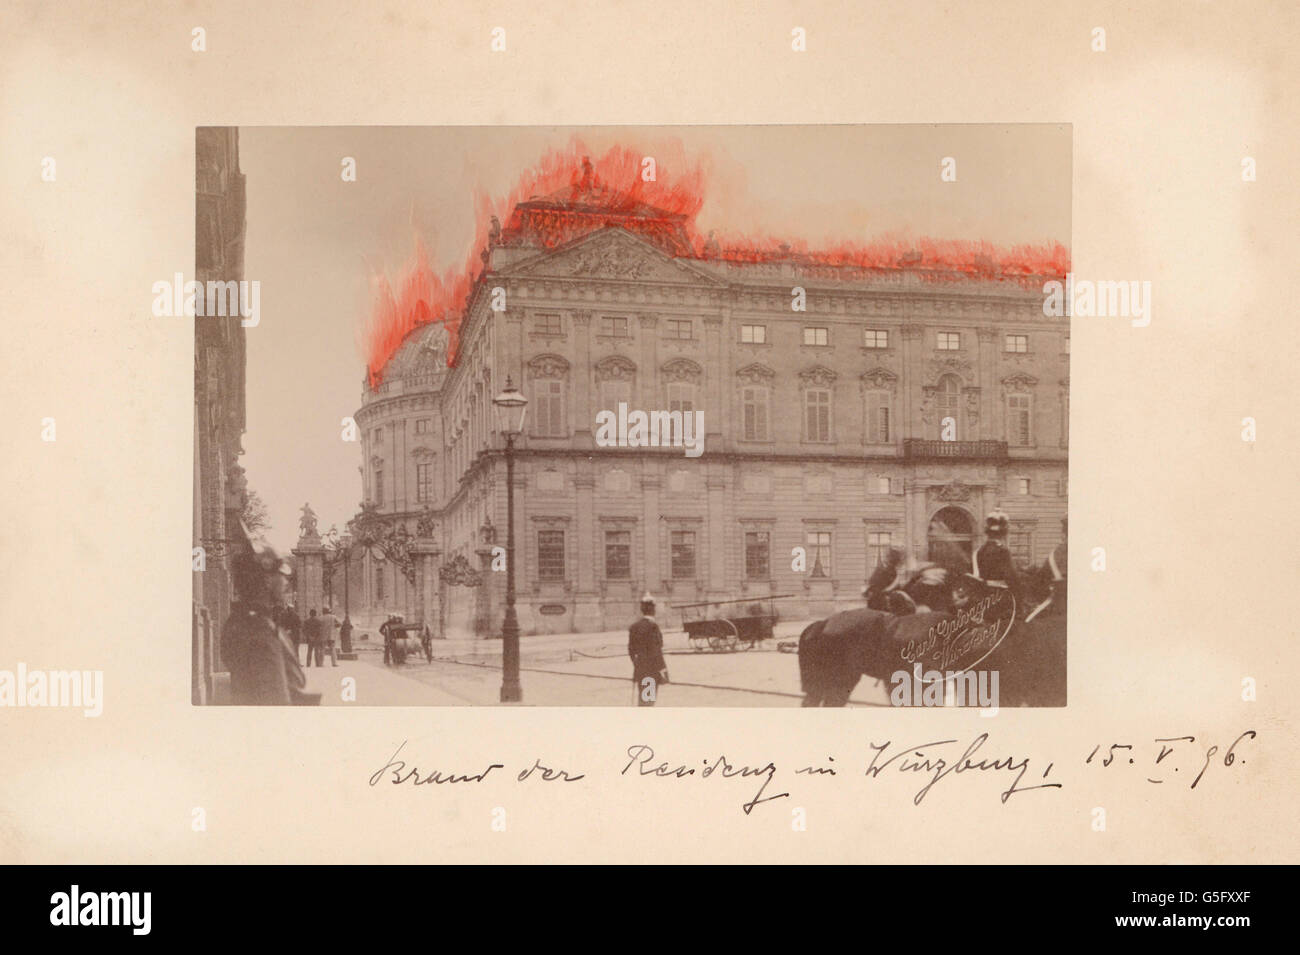 fire of the Wuerzburg Residenz, 15.5.1896, retouched cabinet card by Carl Galvangni, Wuerzburg, 1896, retouching, rework, fire brigade, fire department, fire brigades, fire departments, police, flames, flame, palace, palaces, castle, castles, people, Lower Franconia, Kingdom of Bavaria, German Empire, Imperial Era, 19th century, fire, fires, historic, historical, Additional-Rights-Clearences-Not Available Stock Photo